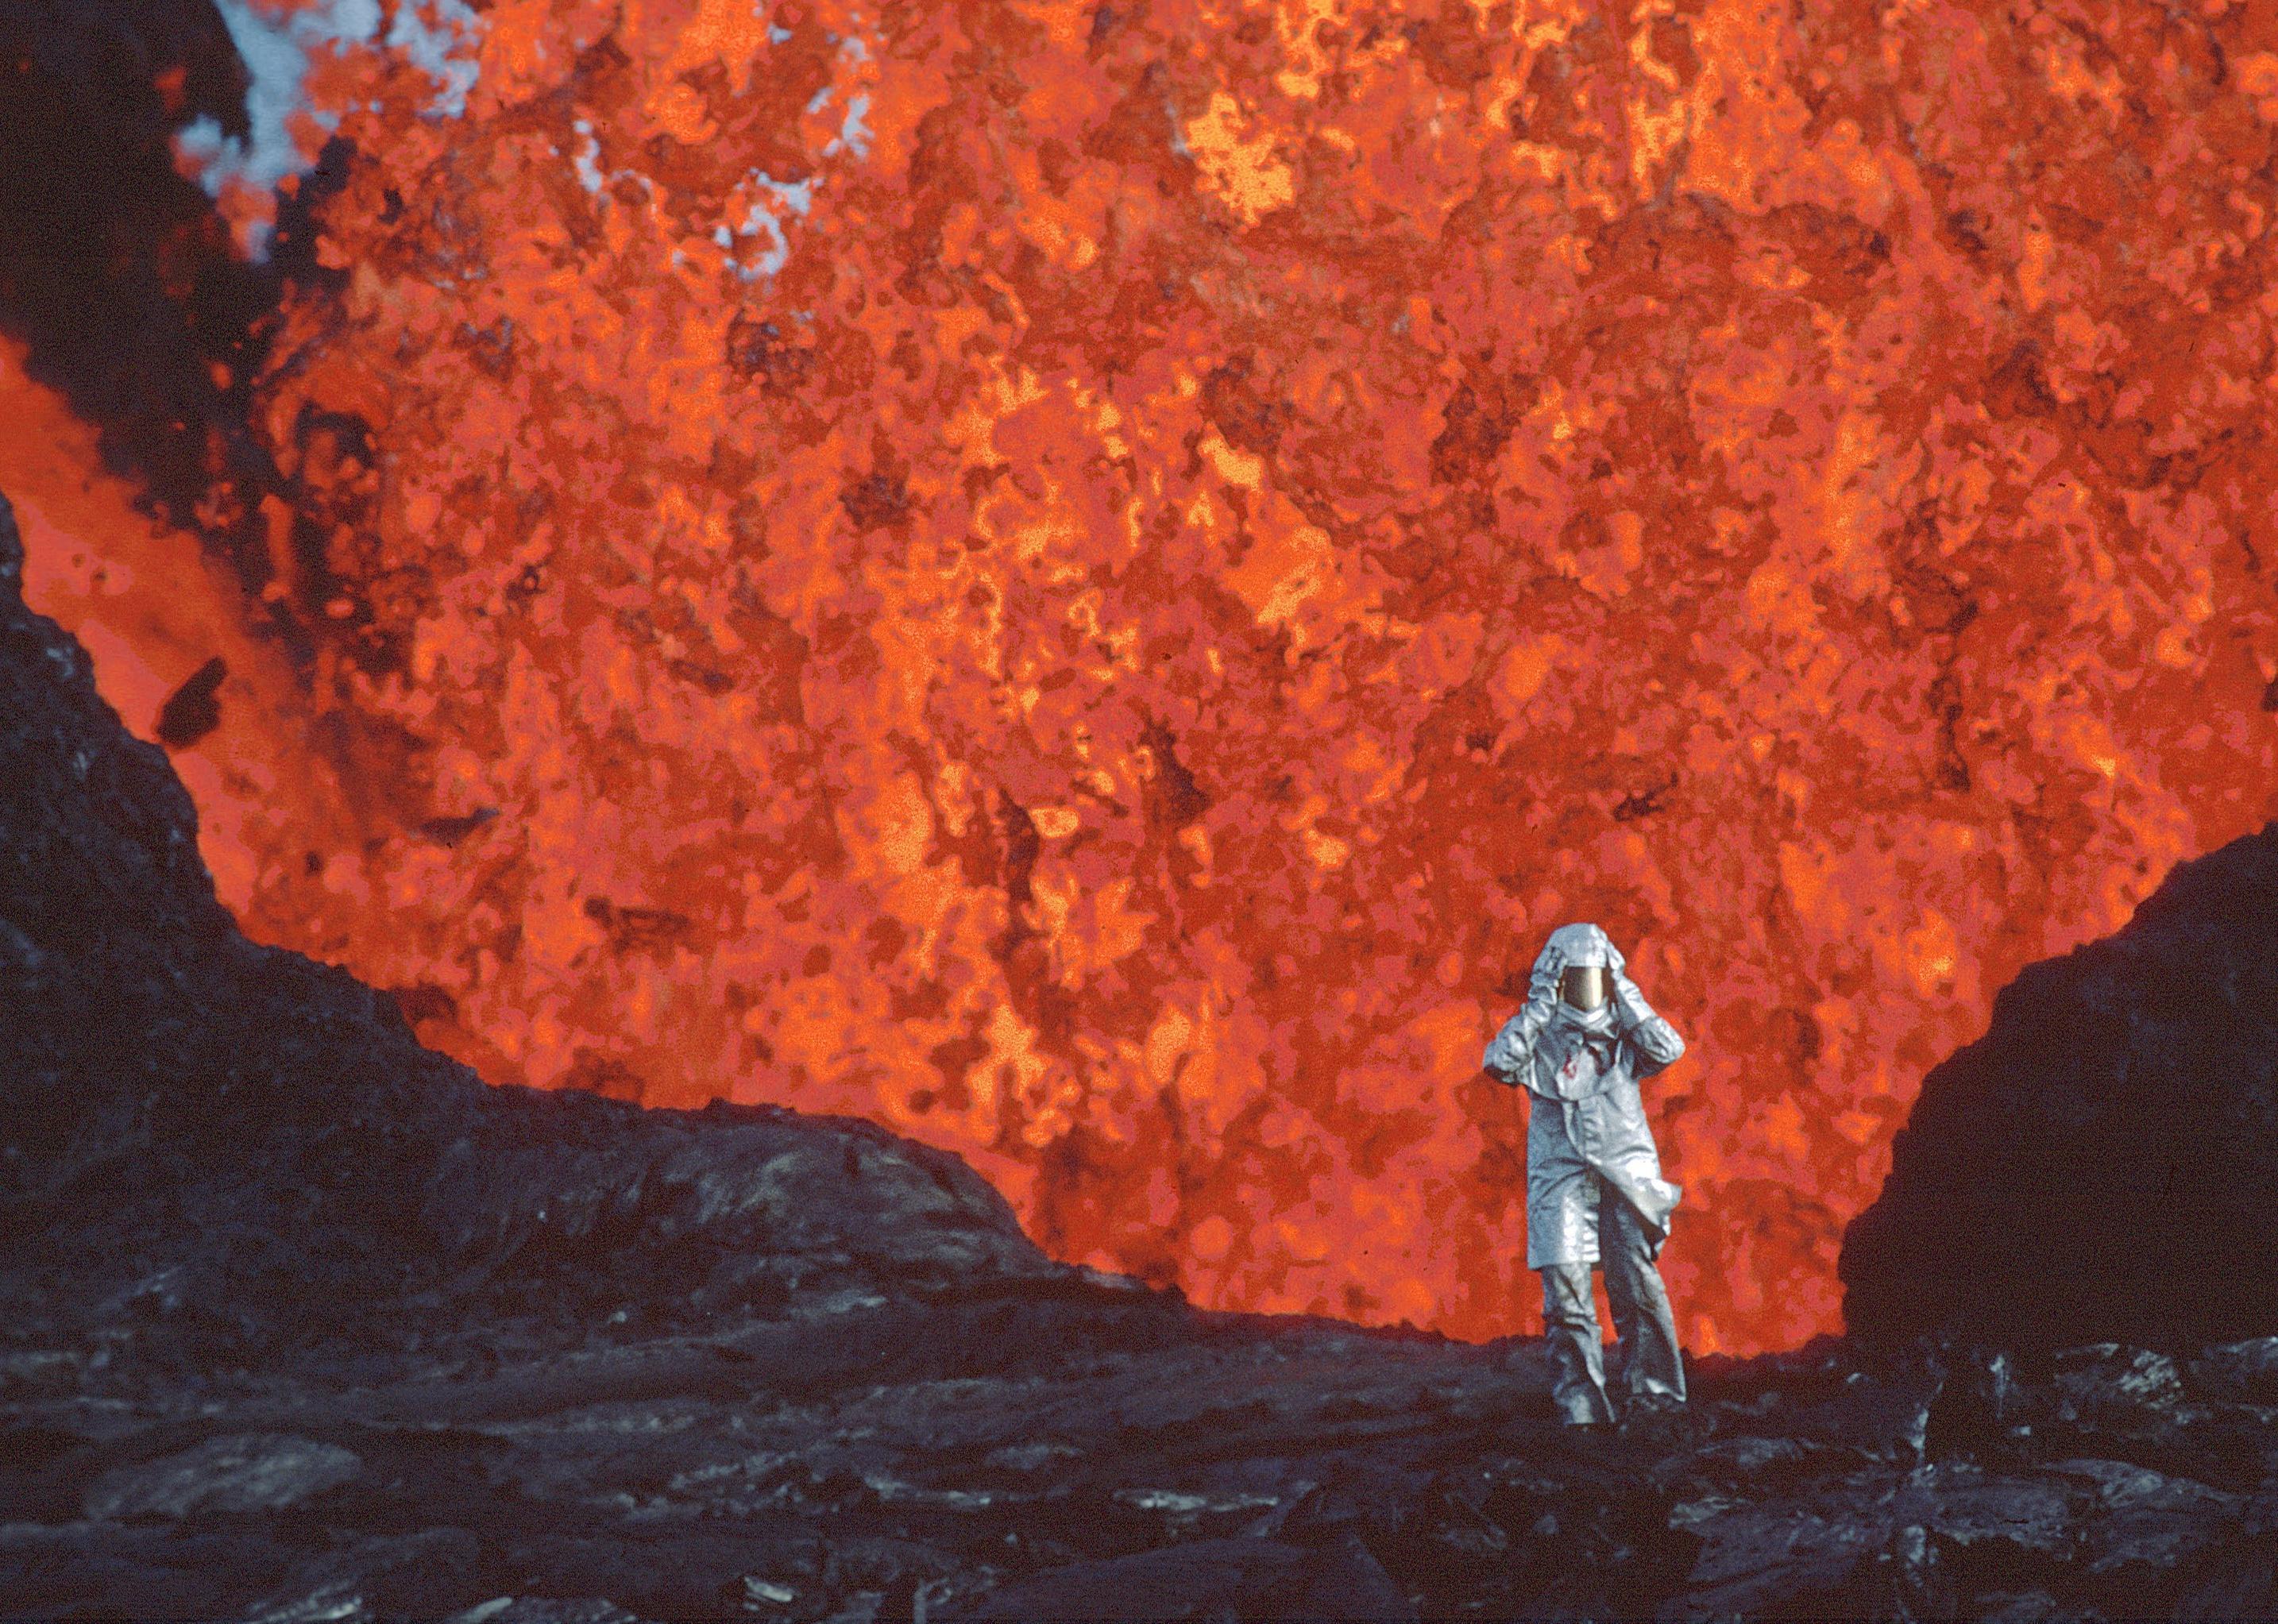 A person in a silver suit walking away from an erupting volcano.